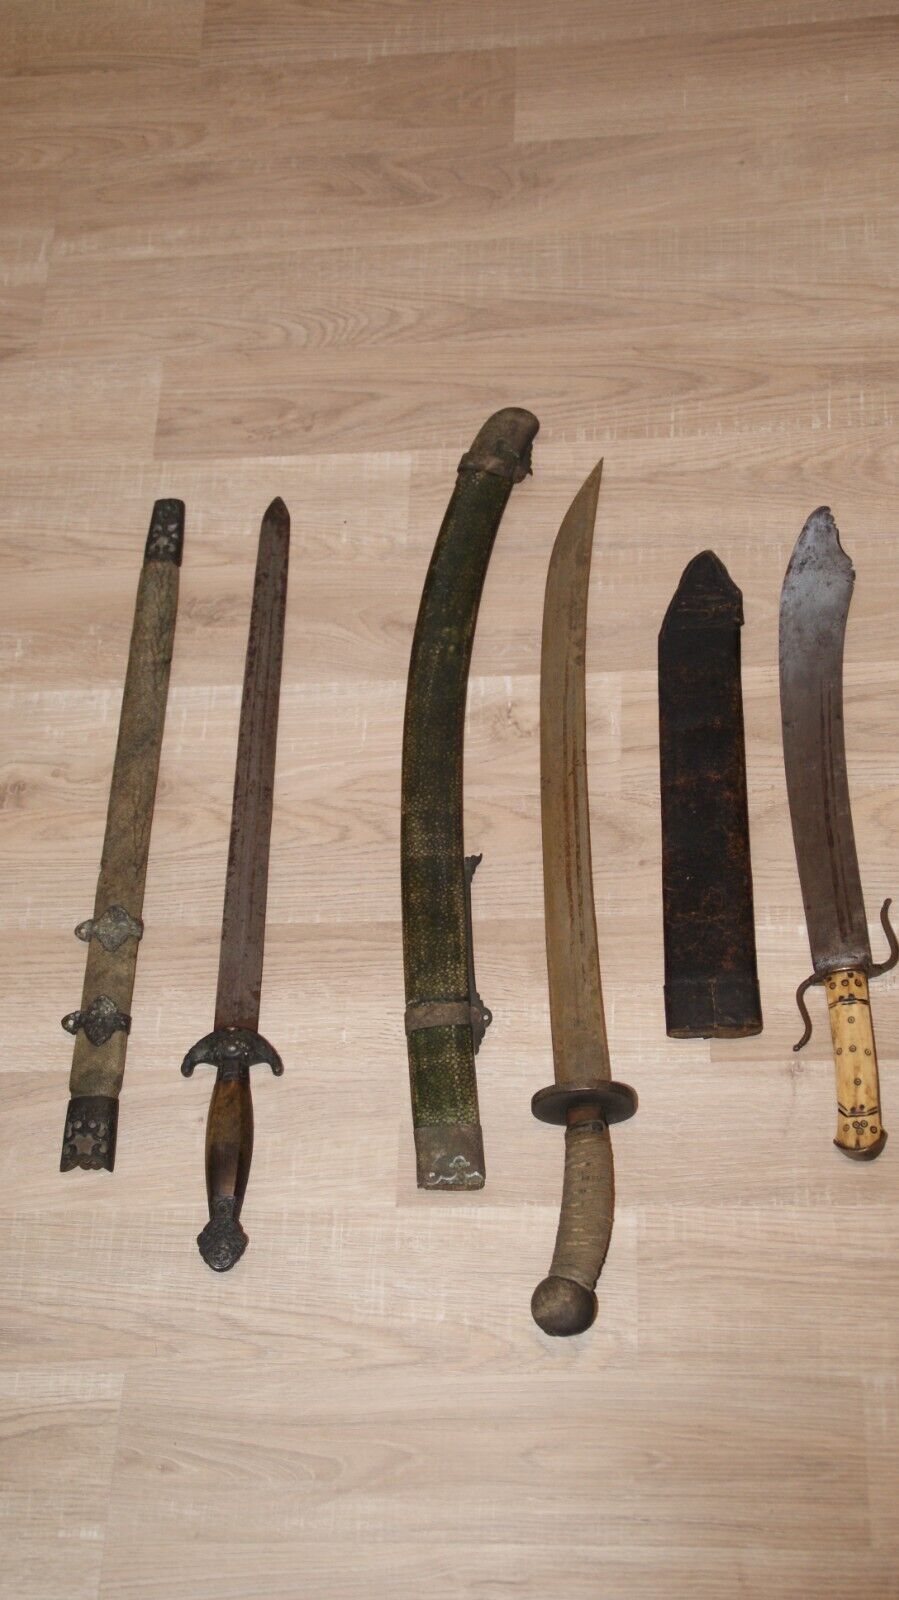 Antique /Old Chinese swords (Dao,DaDao,Jian) 18th century